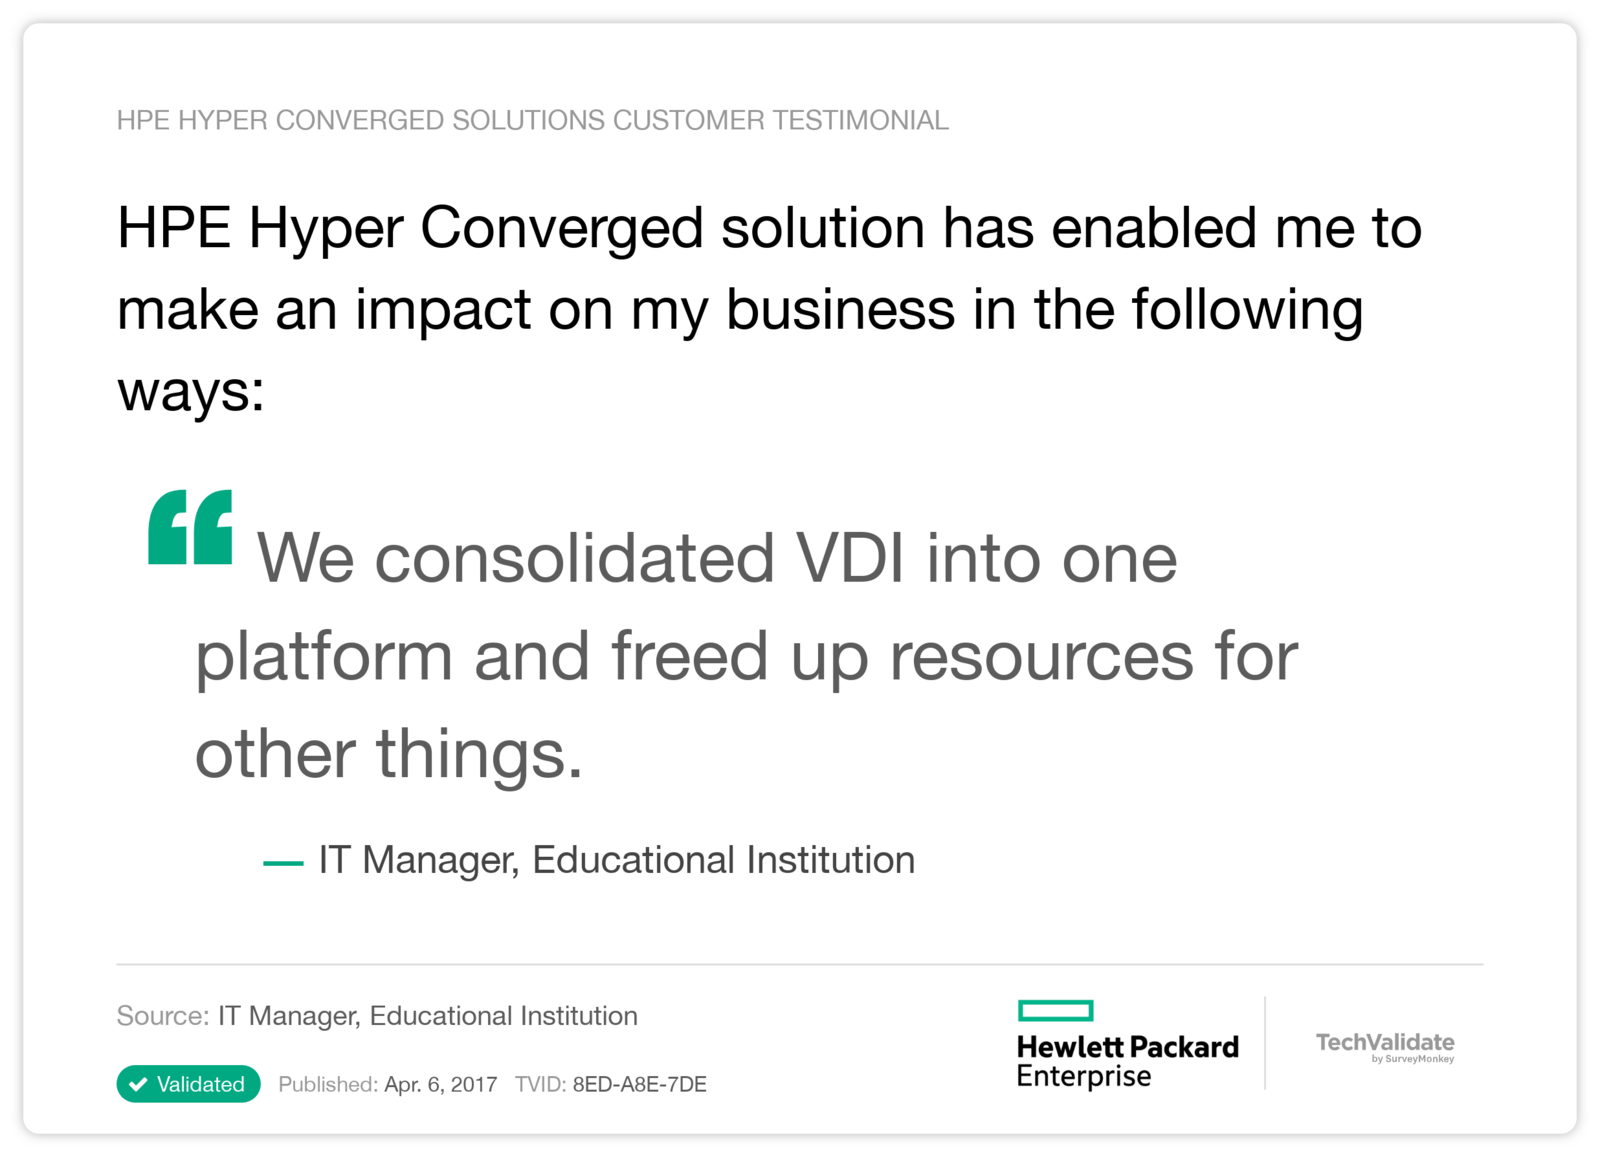 HPE Hyper Converged solution has enabled me to make an impact on my business in the following ways: